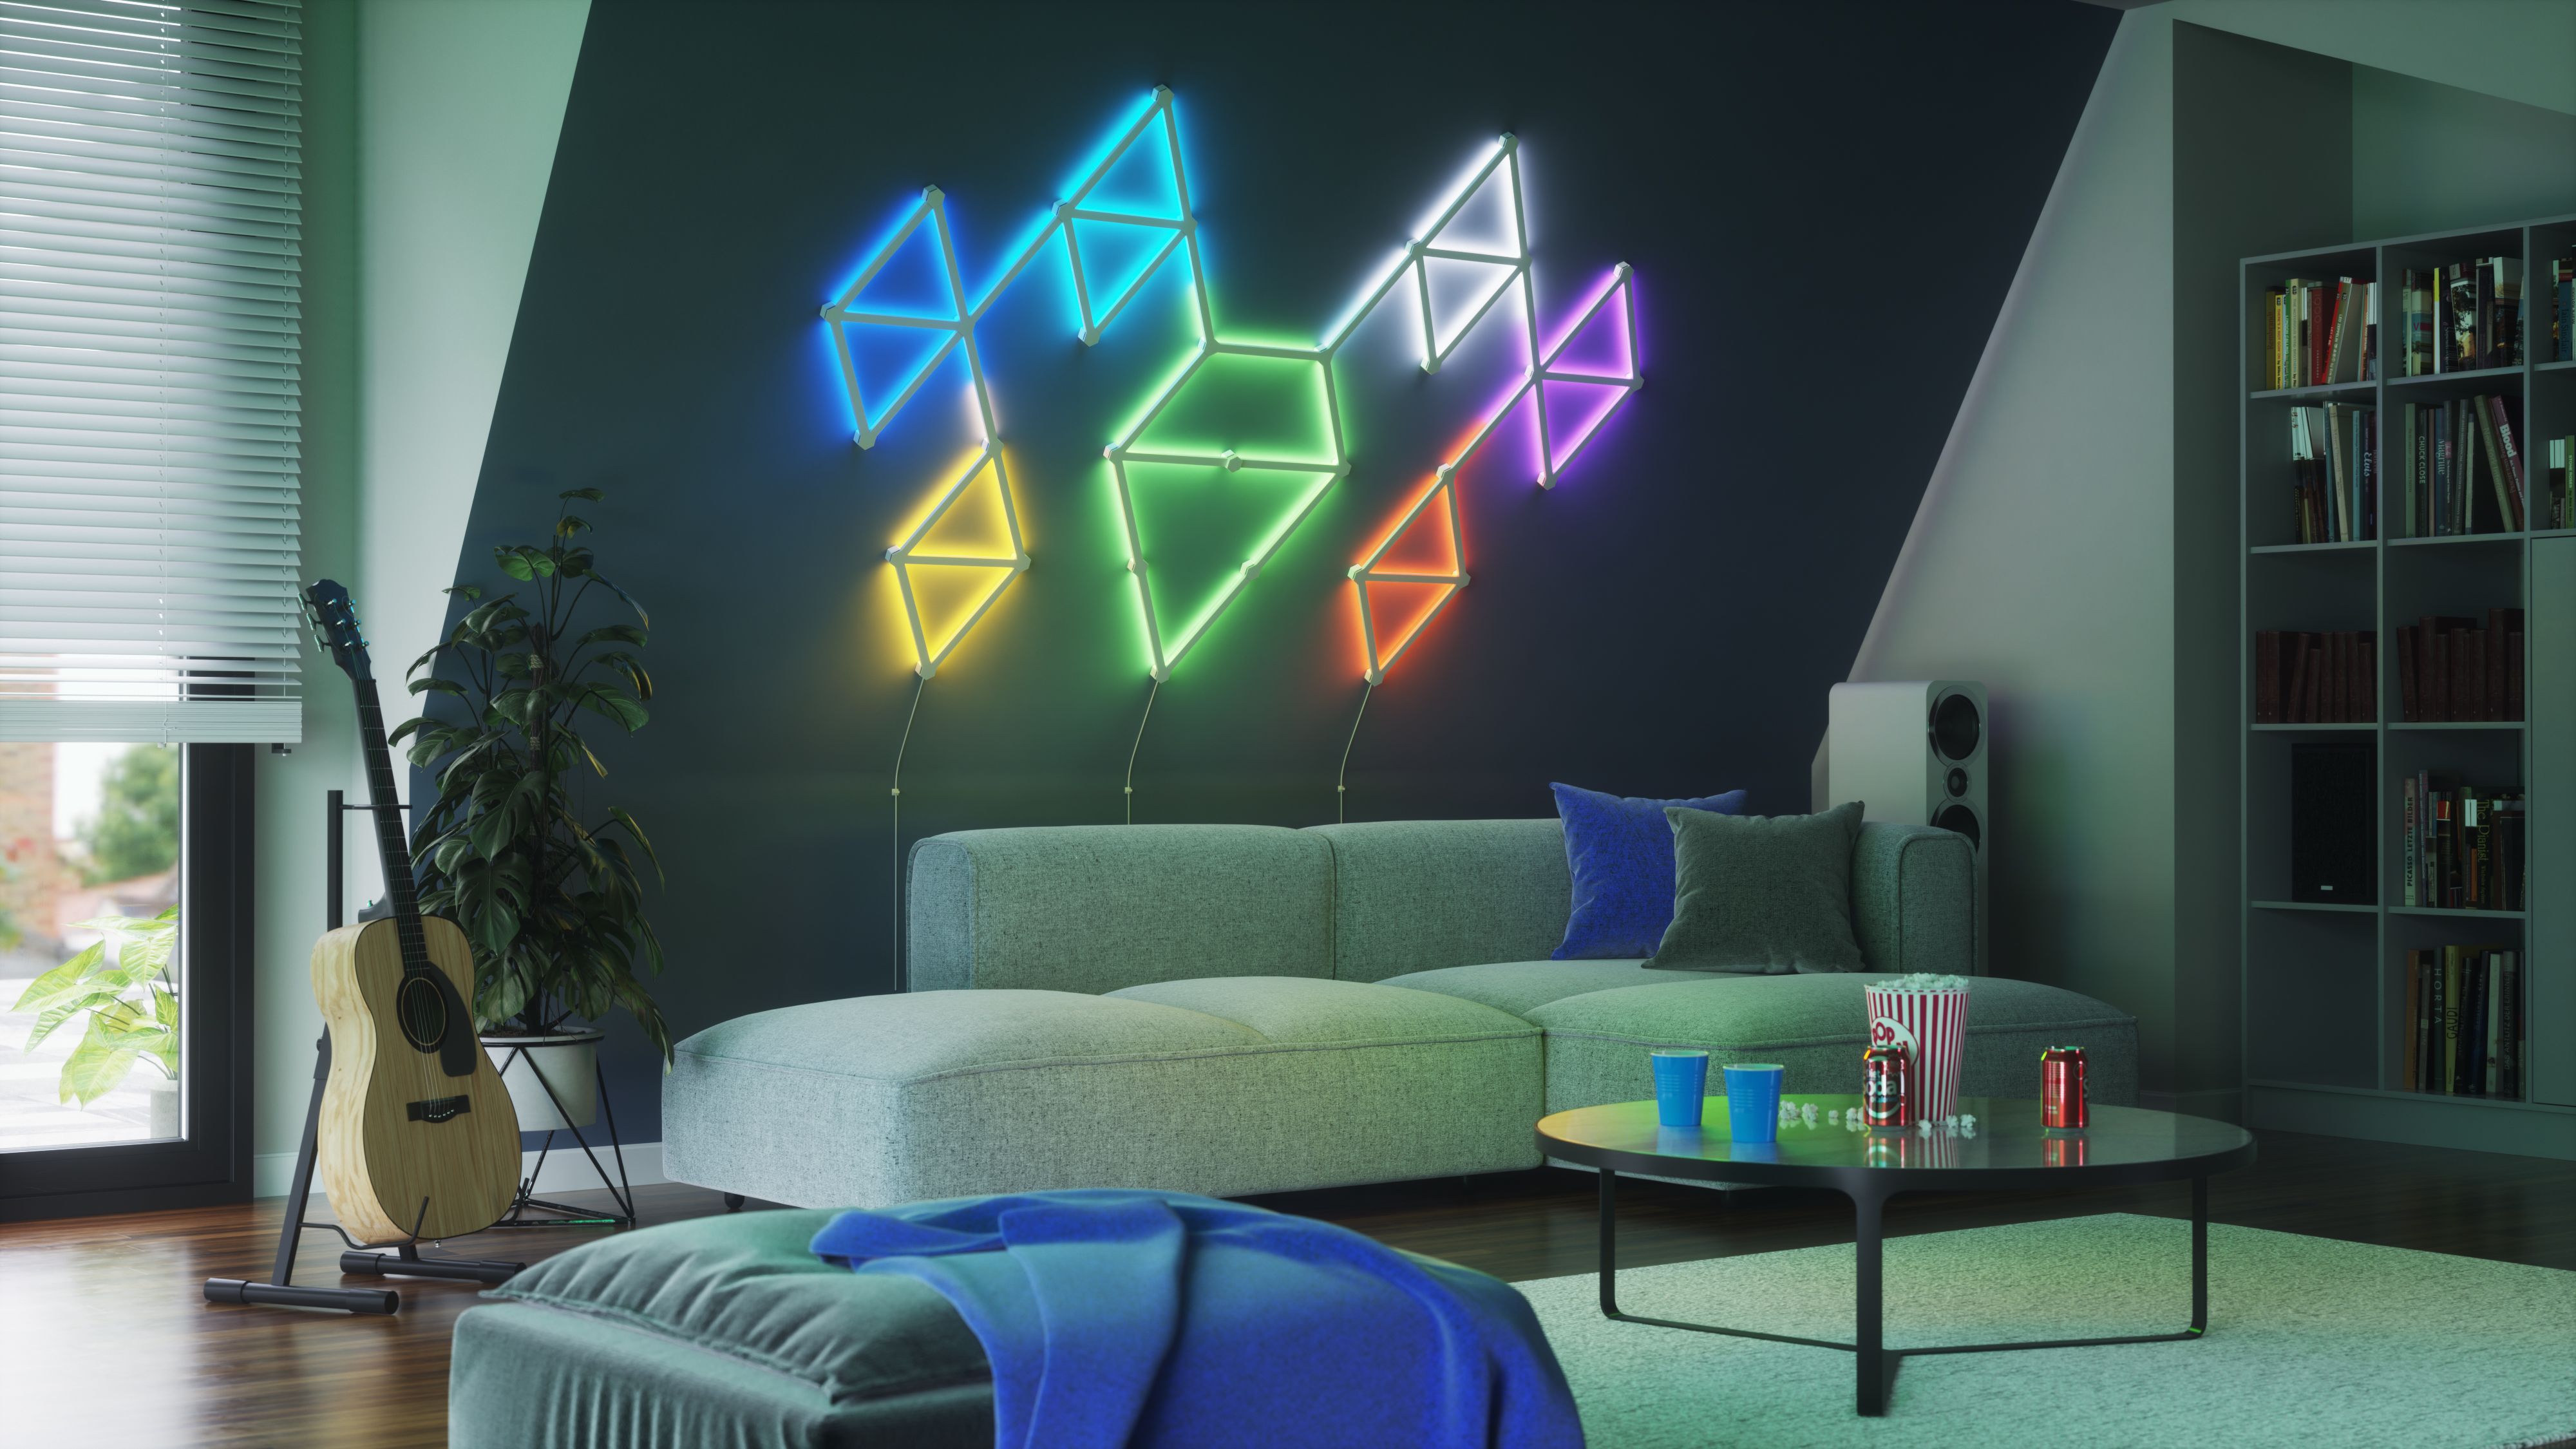 Infinite Designs to Transform Home Entertainment with the Modern Mood Lighting from Nanoleaf | Nestia